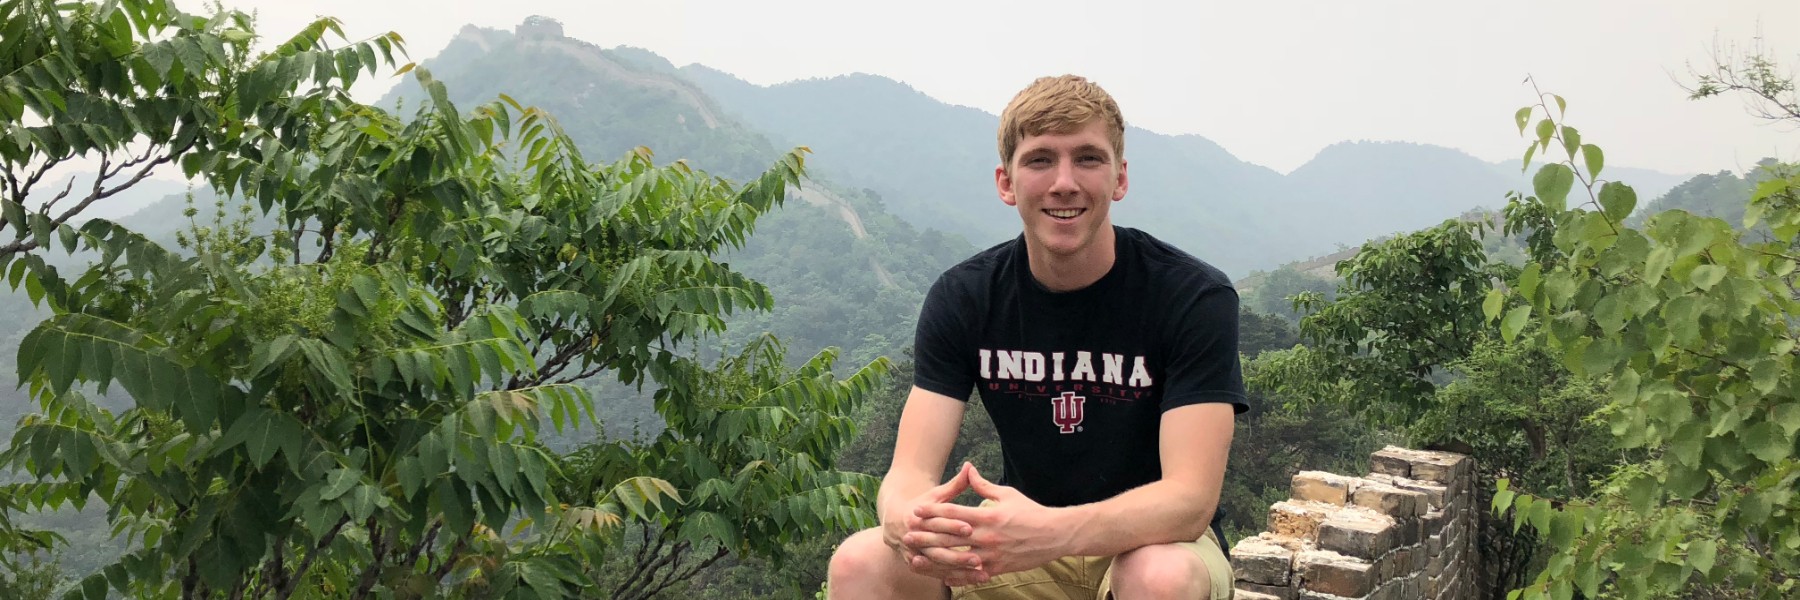 HIEP recipients in Asia and the Middle East - Calvin Isch poses for a photo while sitting on a section of the Great Wall of China with rolling hills and more wall behind him.